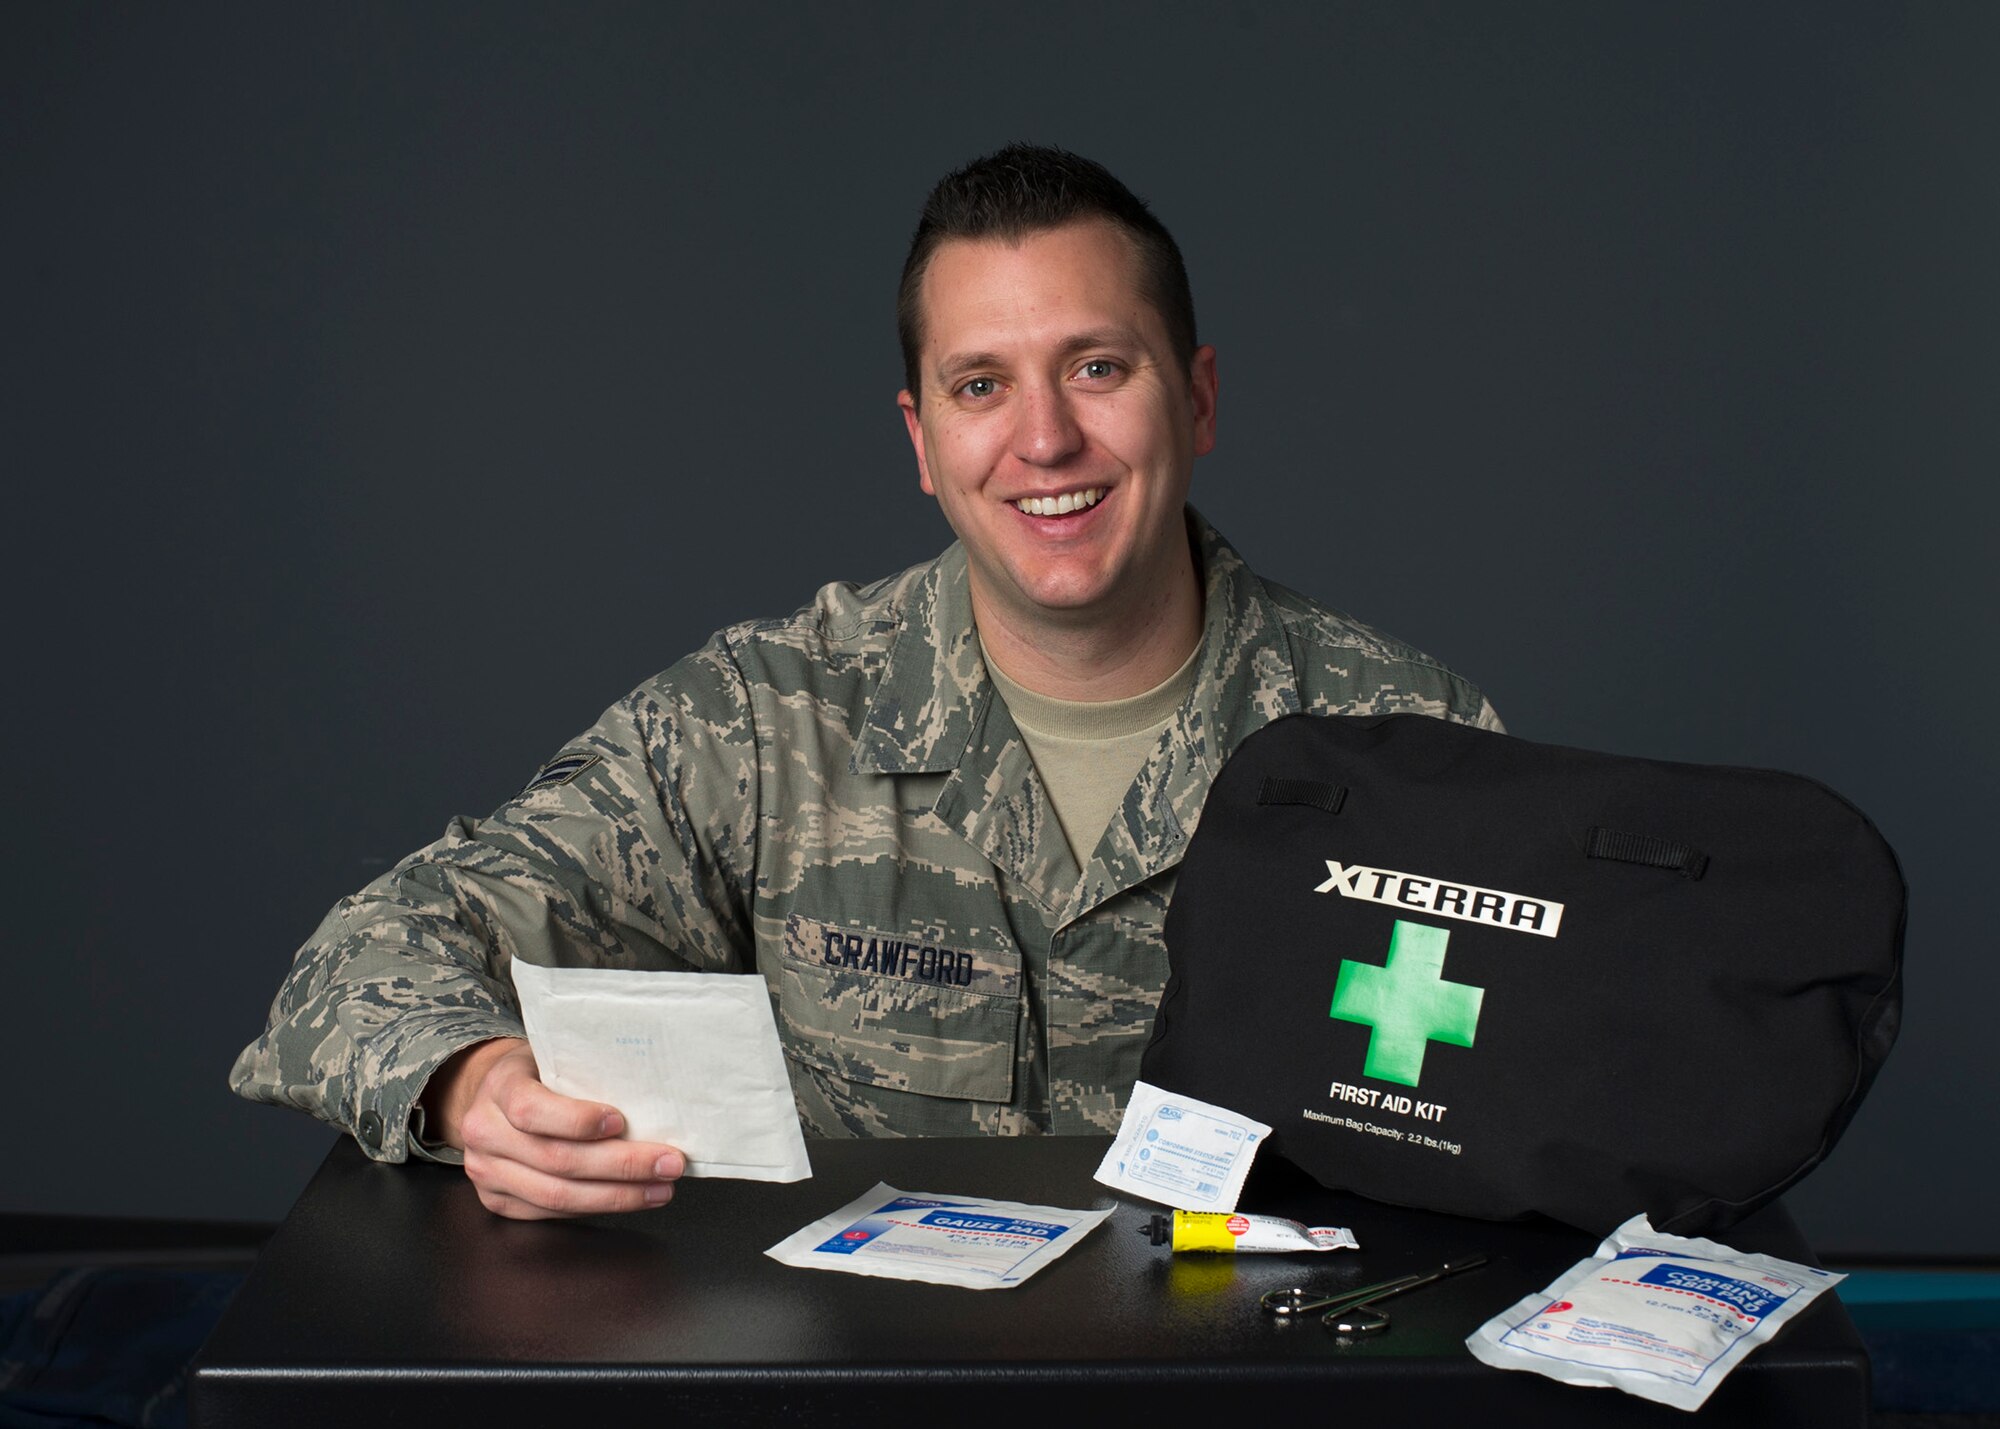 Airman 1st Class Richard Crawford, 60th Communications Squadron cyber security journeyman, poses for a photo with his first aid kit at Travis Air Force Base, Calif., Jan. 5, 2017. Crawford used the kit to care for an injured motorcyclist while traveling in Northern California. (US Air Force Photo by T.C. Perkins Jr.)